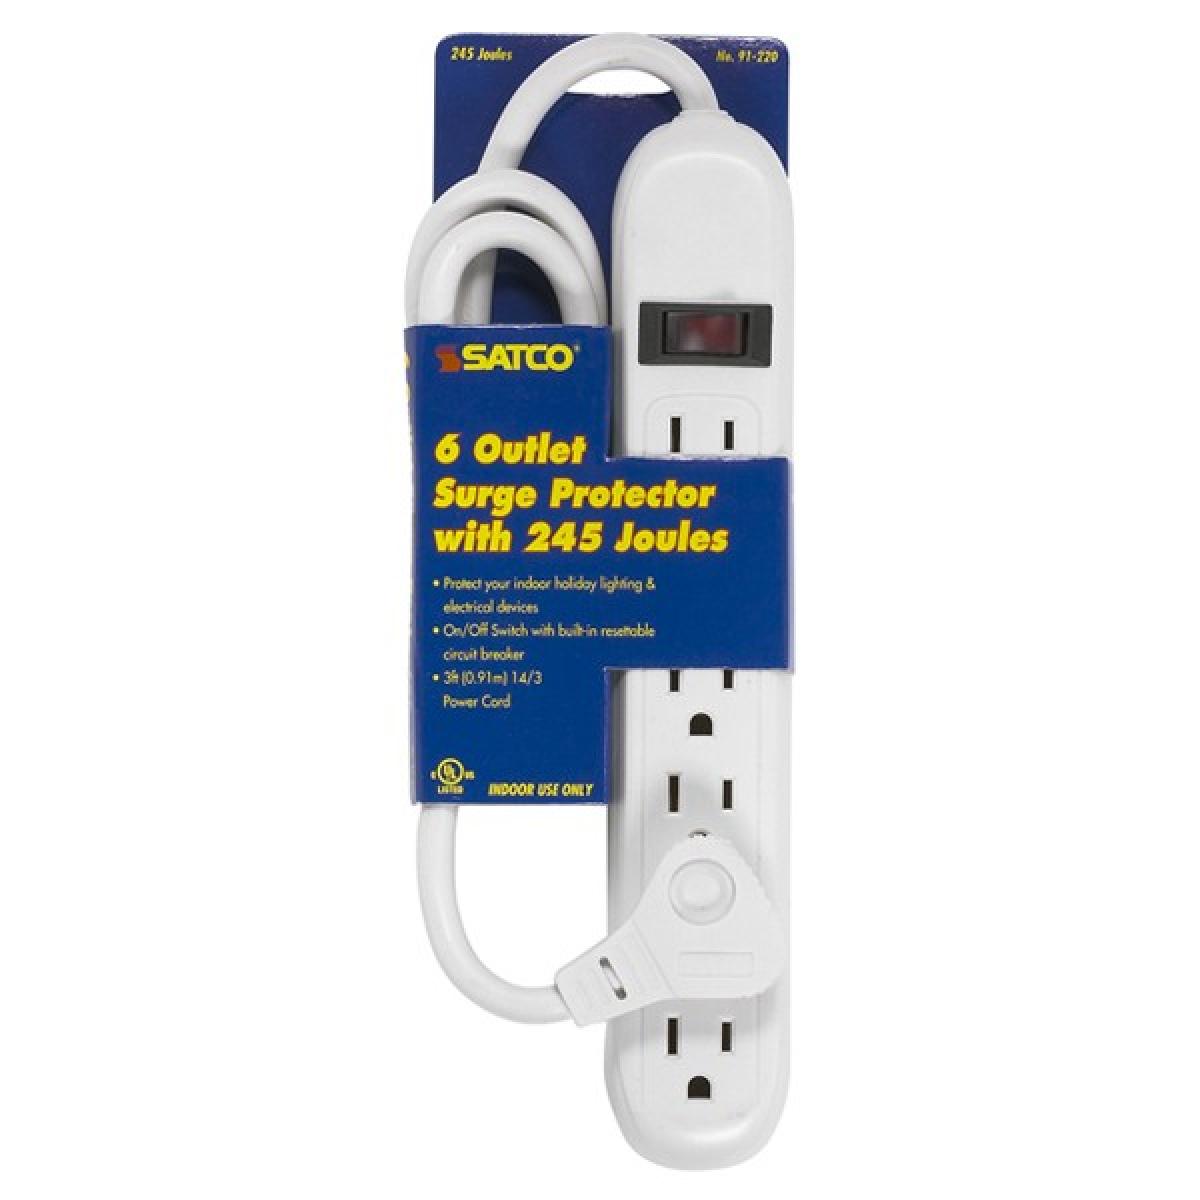 Satco 91-220 6 Outlet Standard Surge Strip With Flat Plug 3 Foot Cord 14/3 SJT Indoor Use Only 245 Joules 15A-125V, 1875W